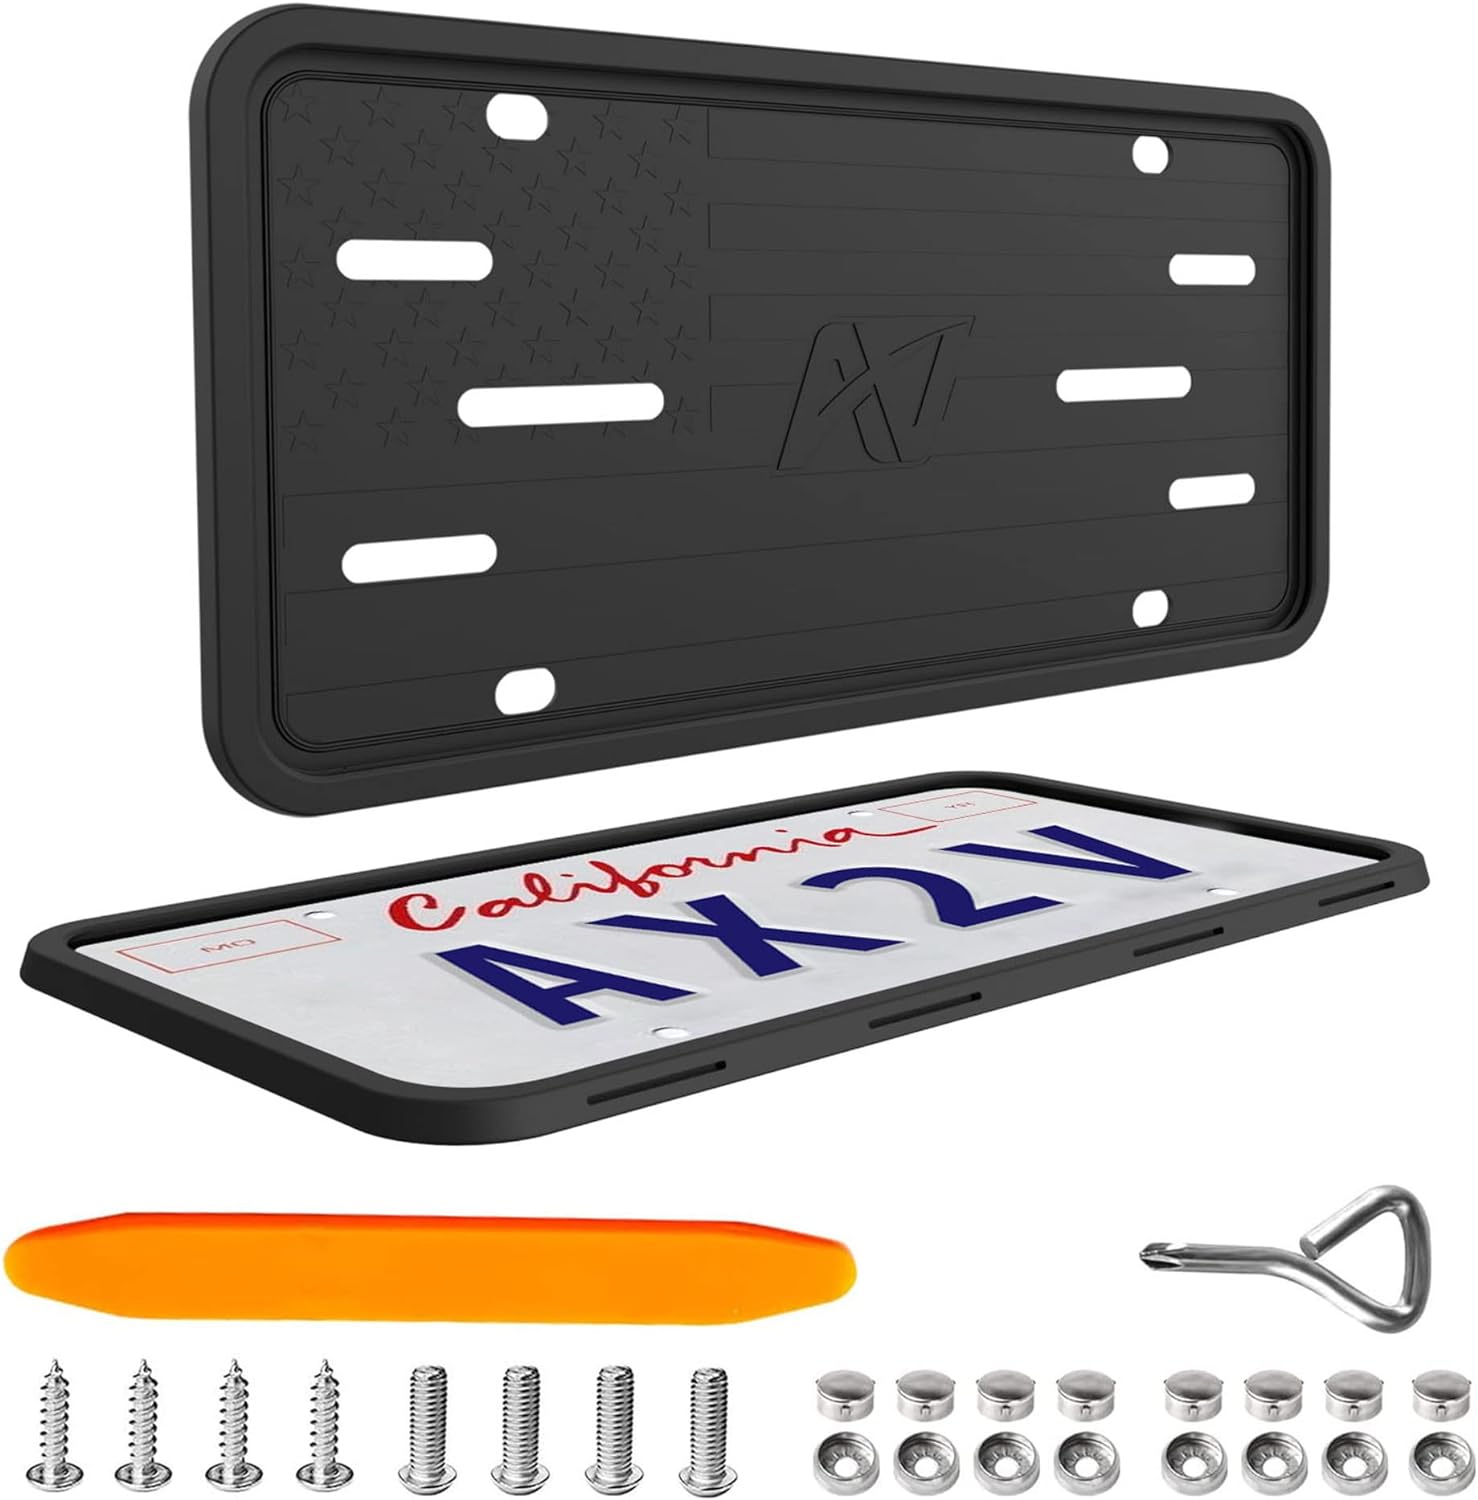  Anti Theft License Plate Frame- Black Silicone Car